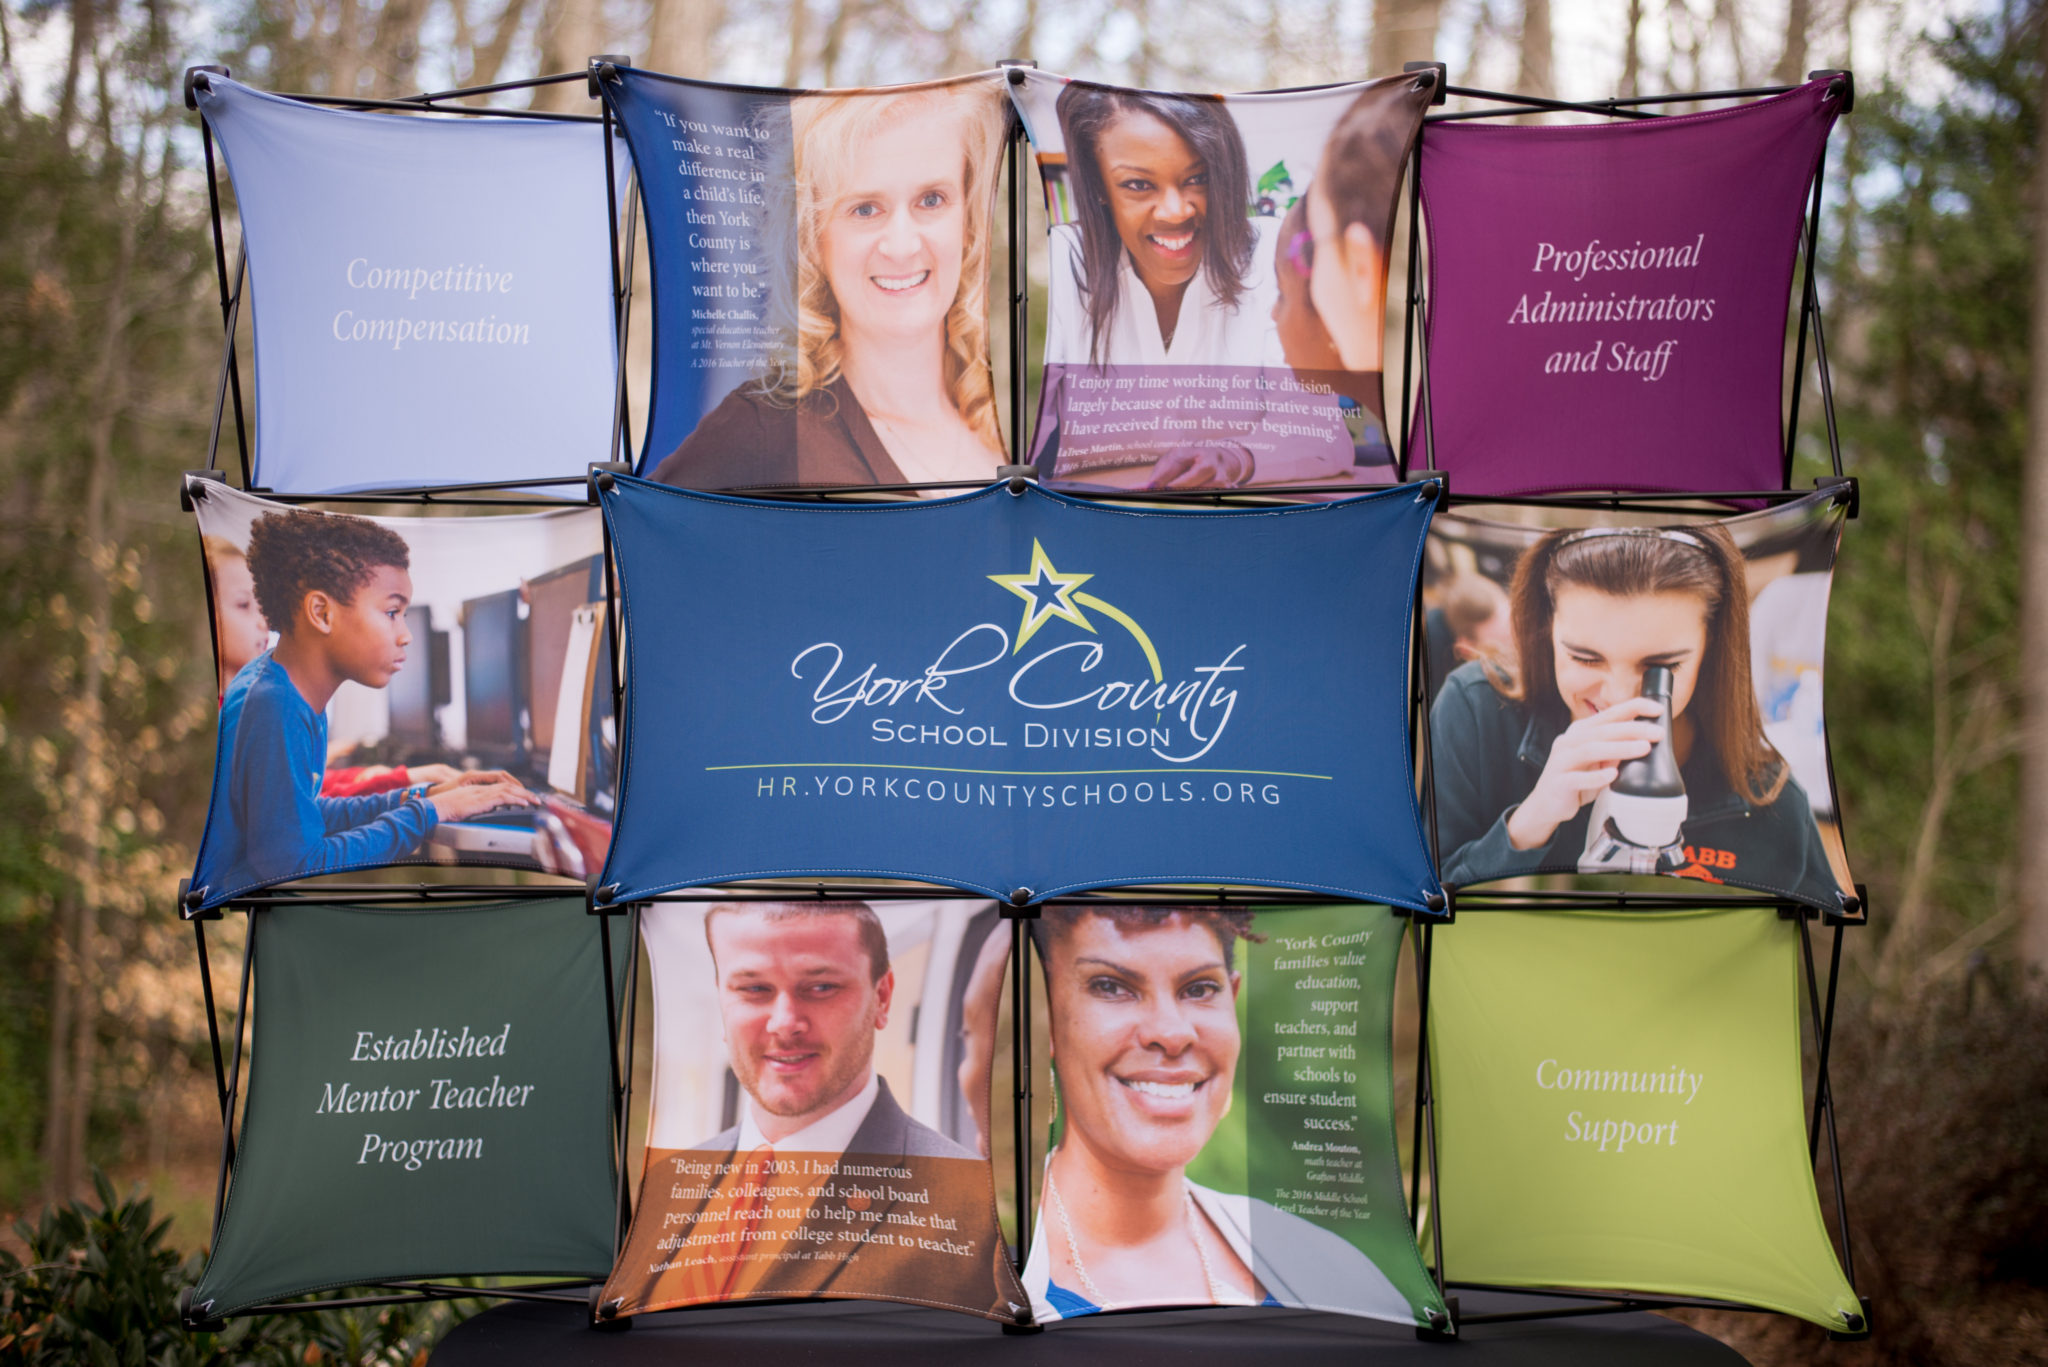 This award-winning campaign utilizes a job fair display, die cut handout, and website to garner more, quality applications for available teaching positions within YCSD. The strategic headers, quotes, and imagery consistently and cohesively touch the four main topics teachers are looking for in a school division: good compensation, helpful and caring administrators, professional development opportunities, and an engaged community.